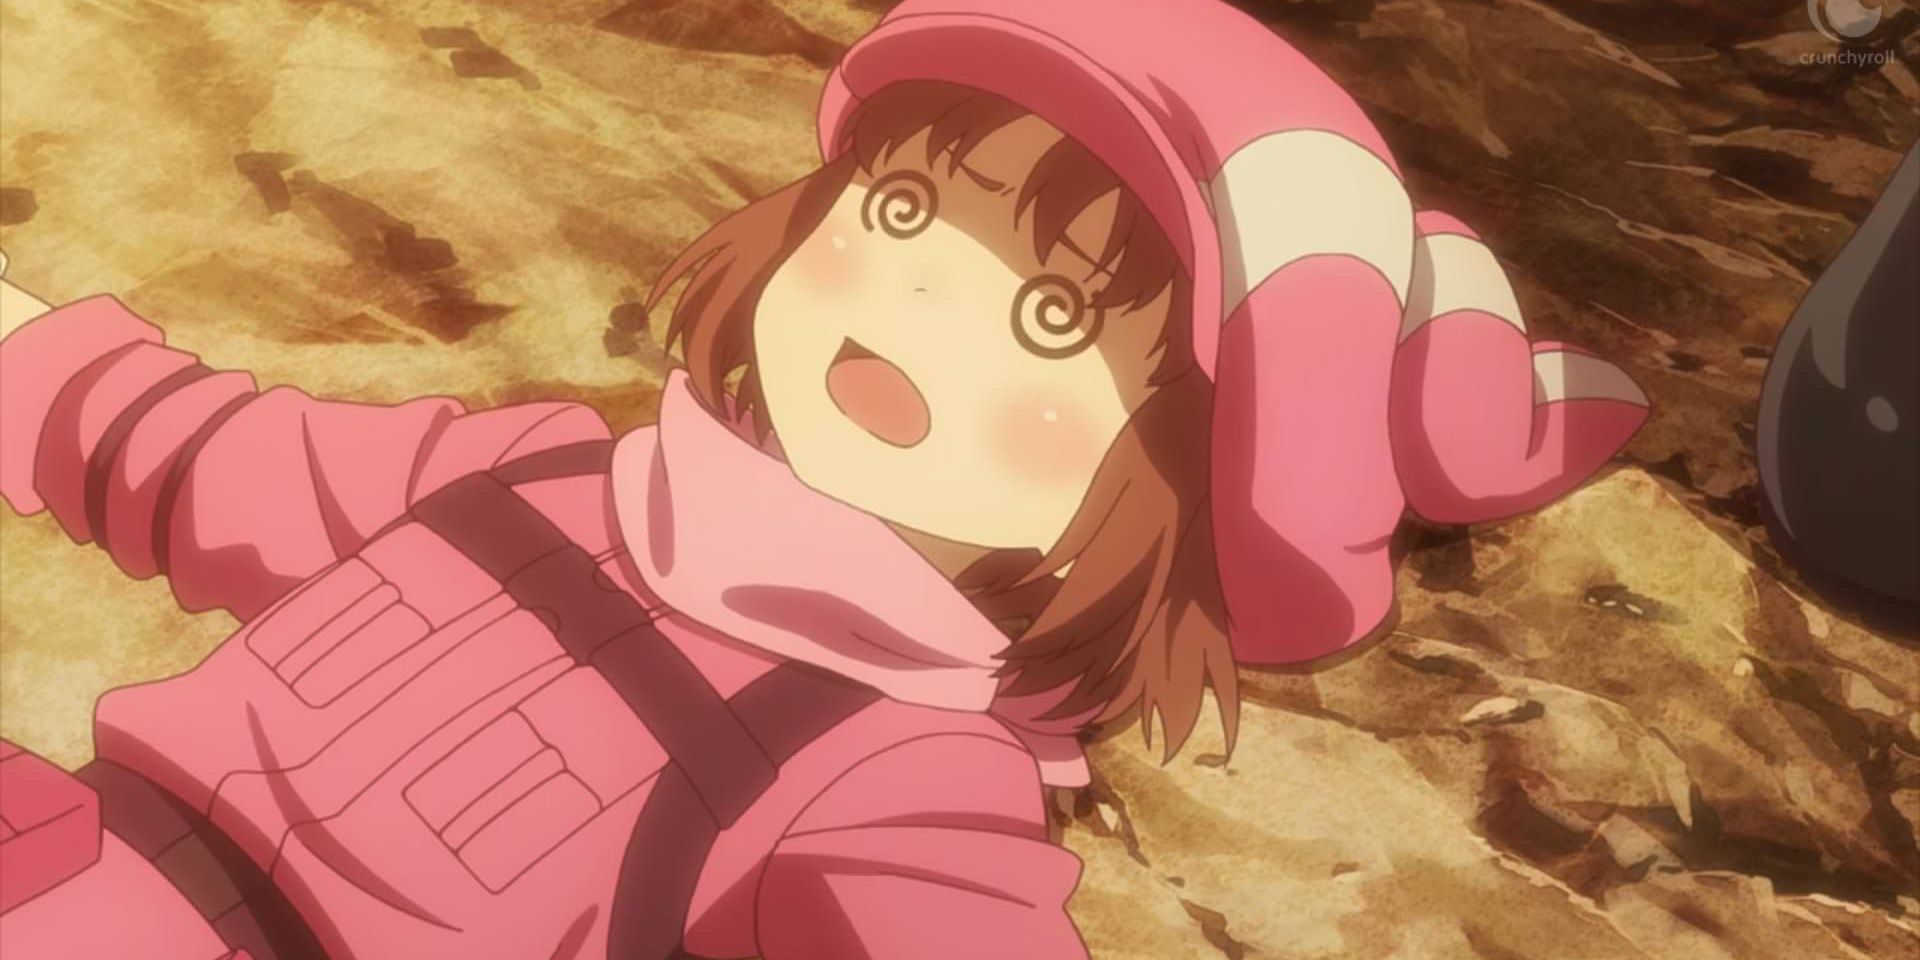 LLENN lies on the rocky ground, with swirls in her eye indicating confusion.